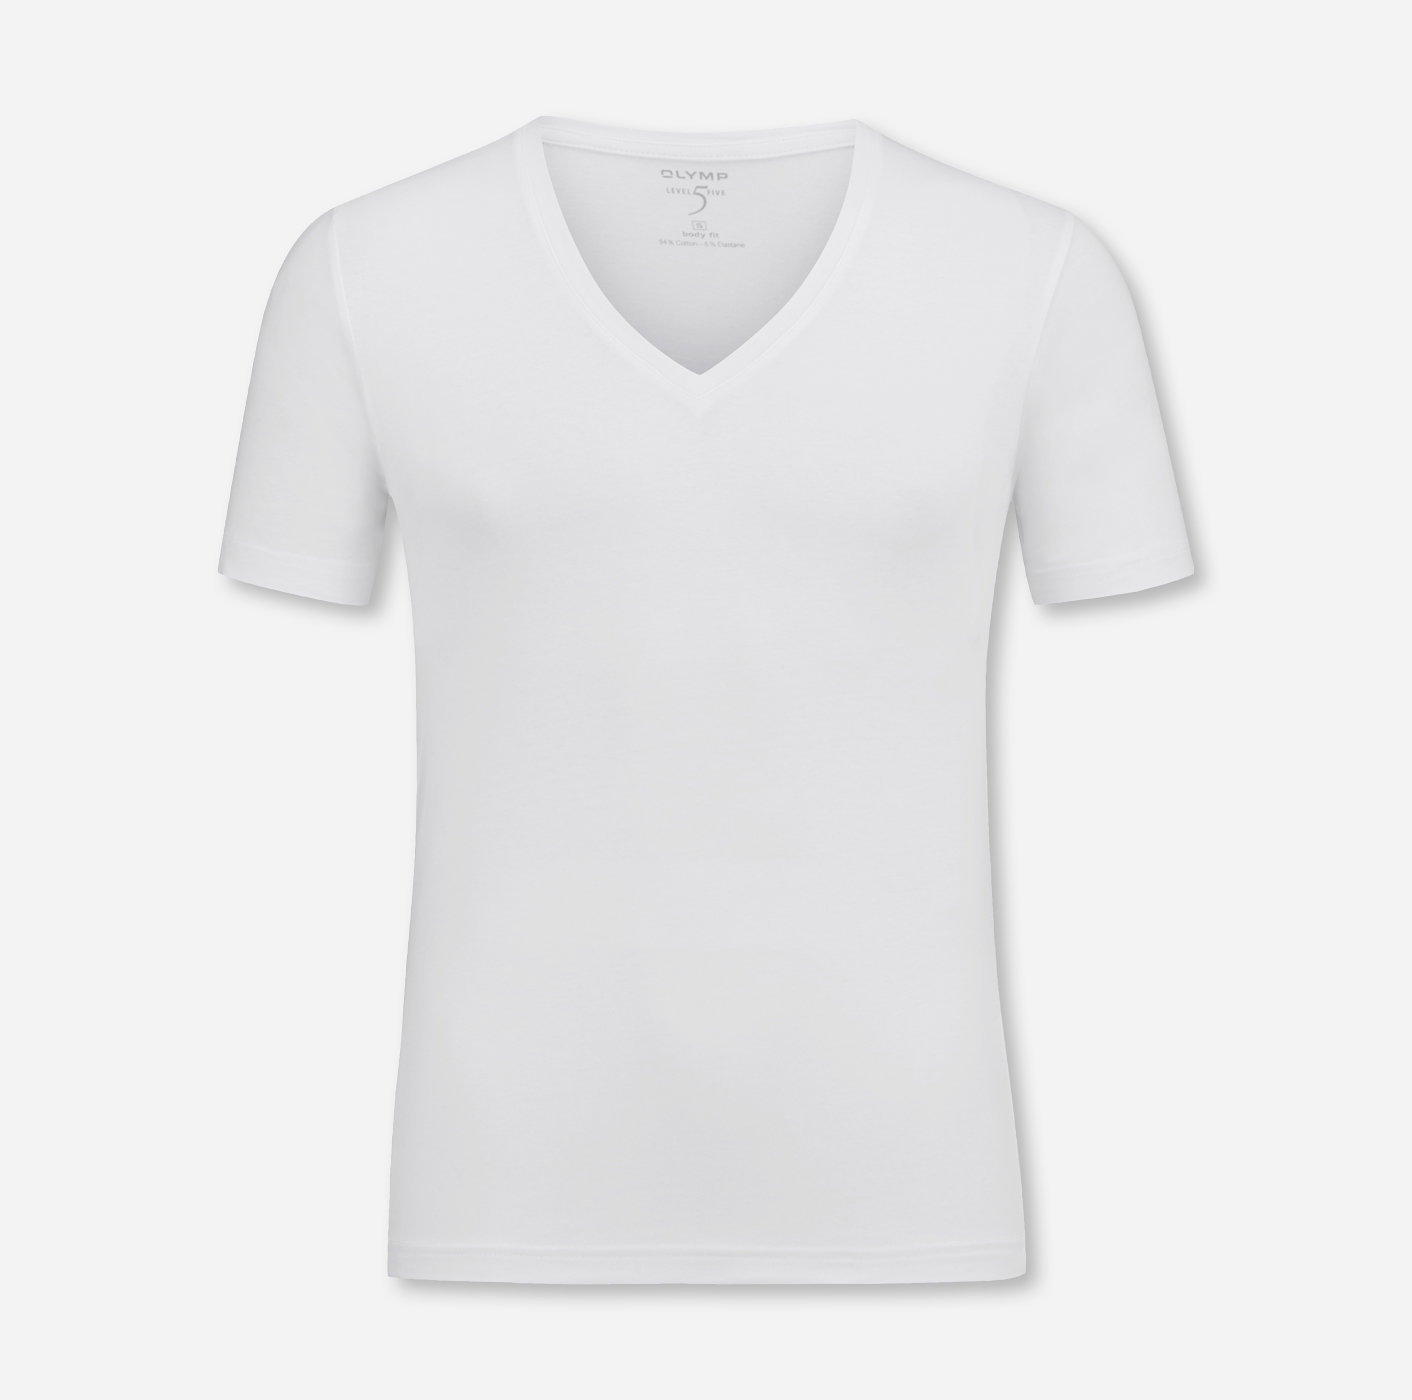 OLYMP Level Five - White Undershirt, fit body 08041200 